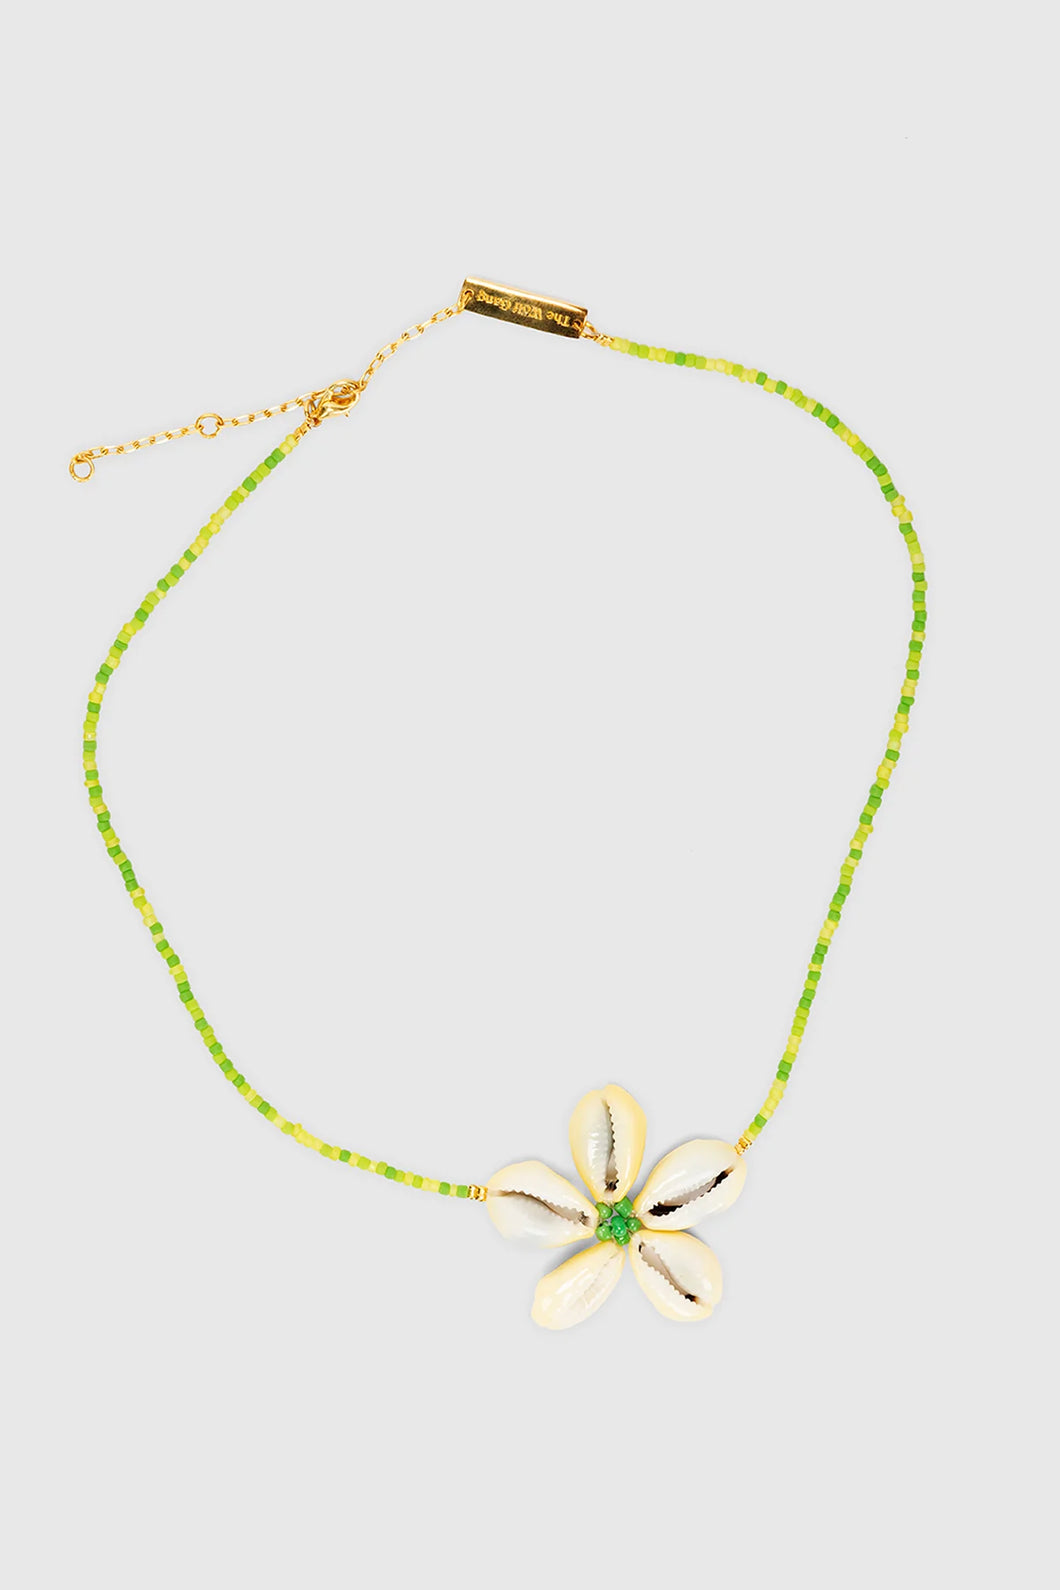 The Wolf Gang - Flores Necklace - Lime